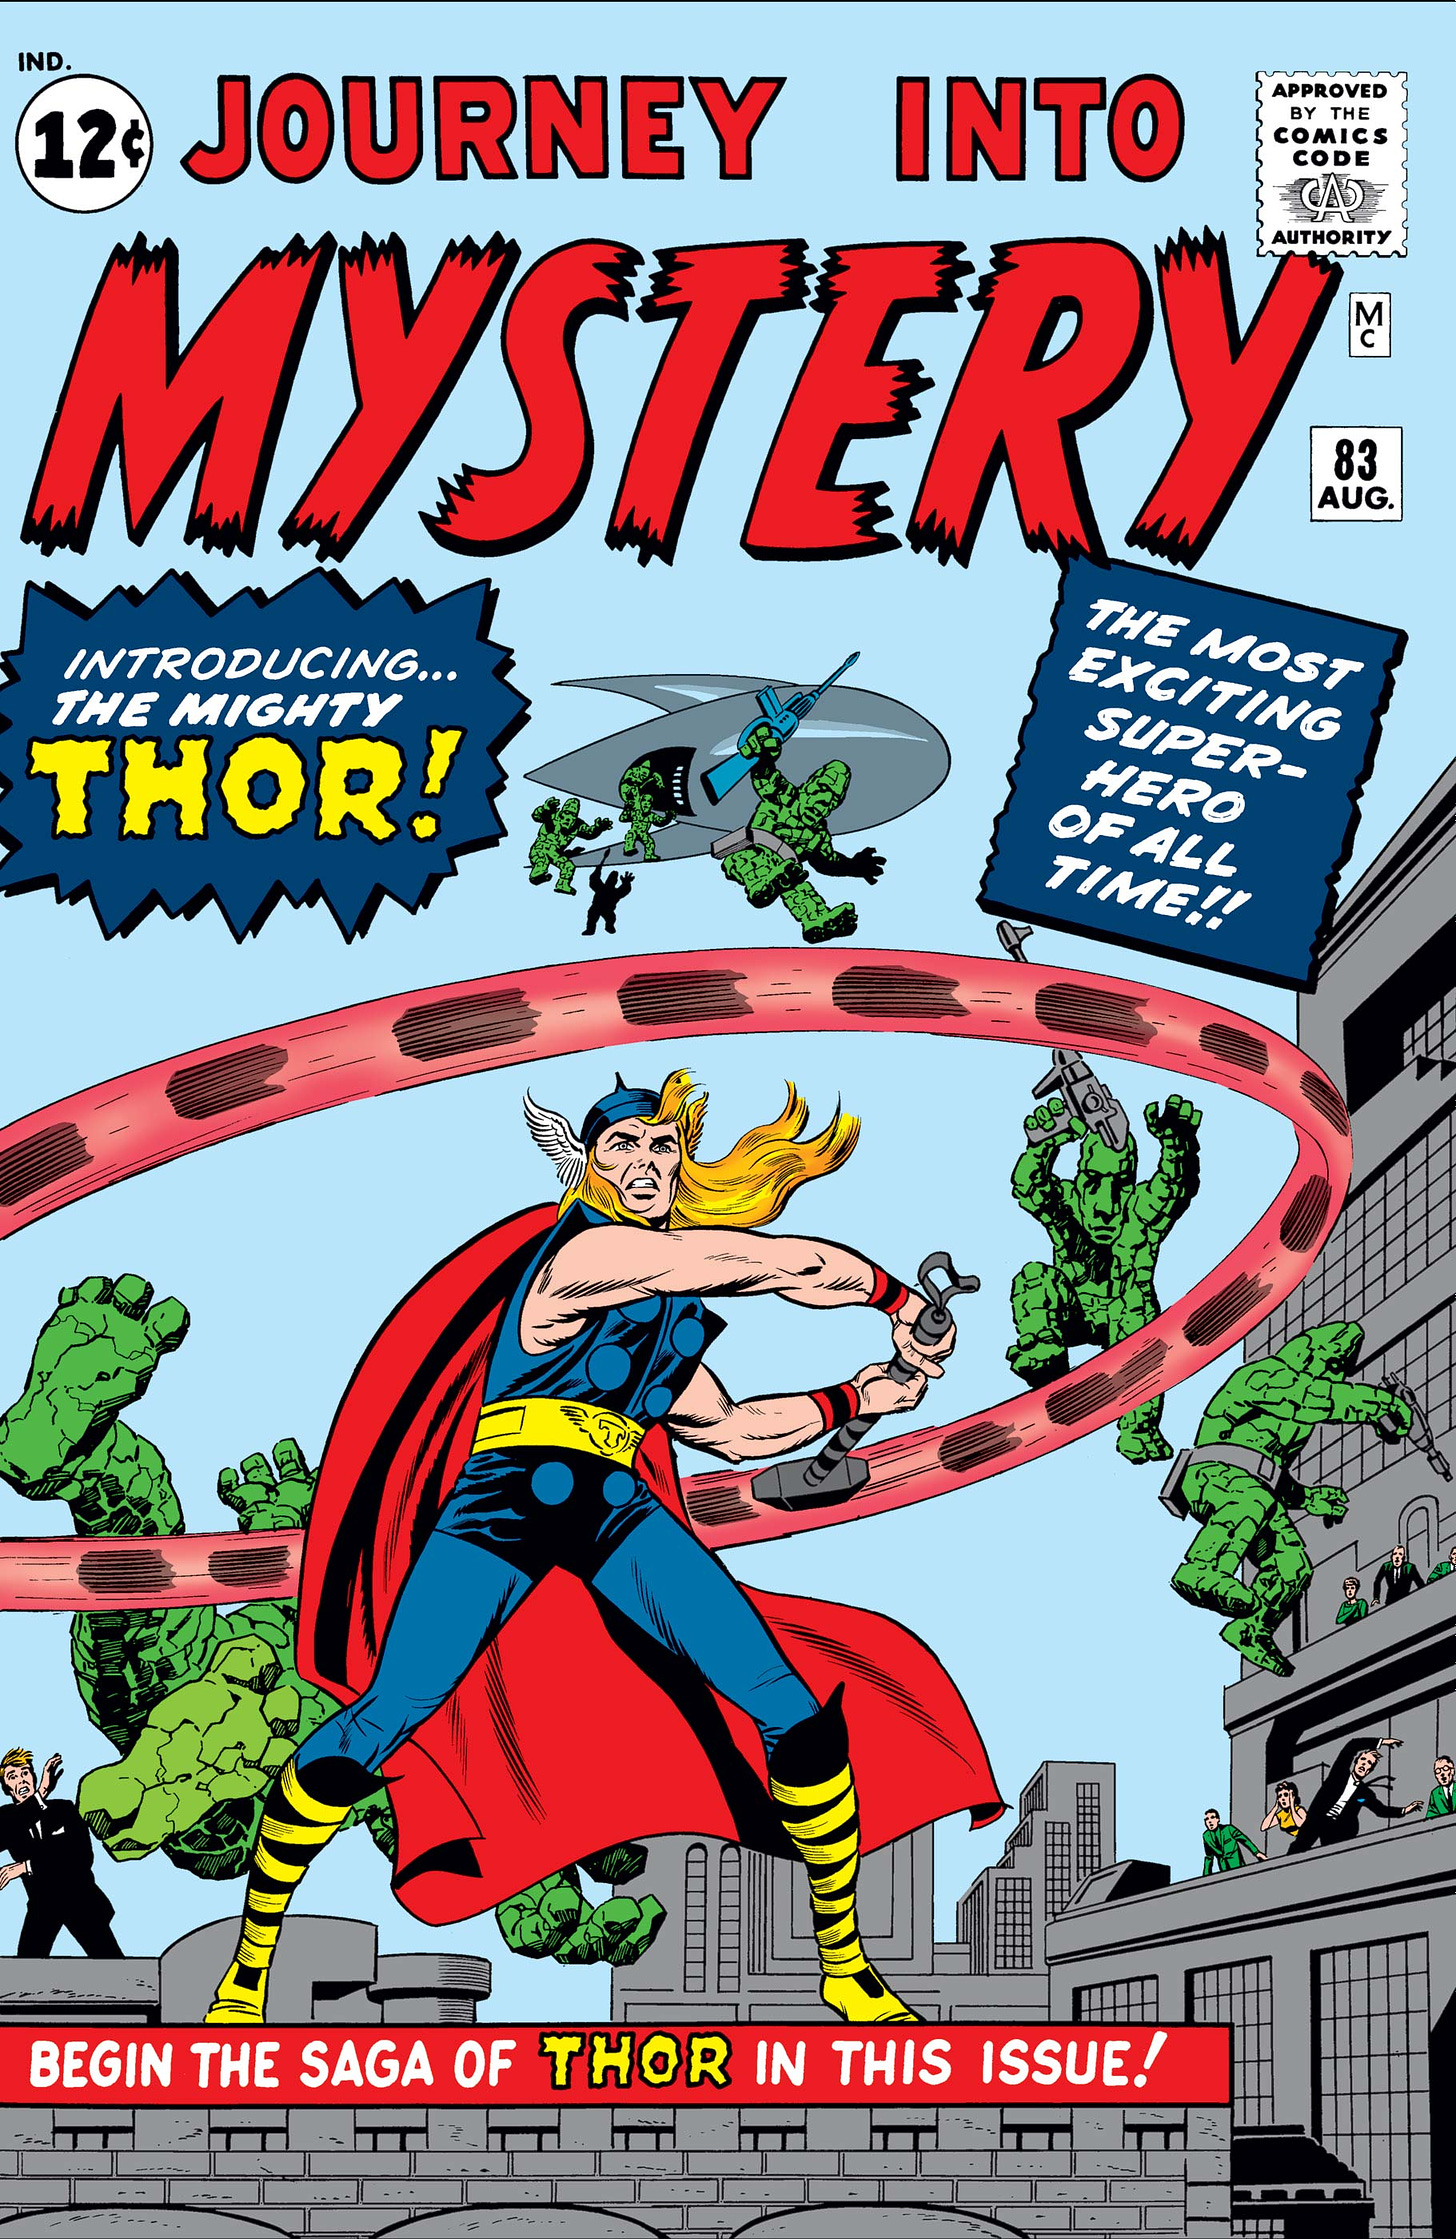 Journey Into Mystery (1952) #83 | Comic Issues | Marvel